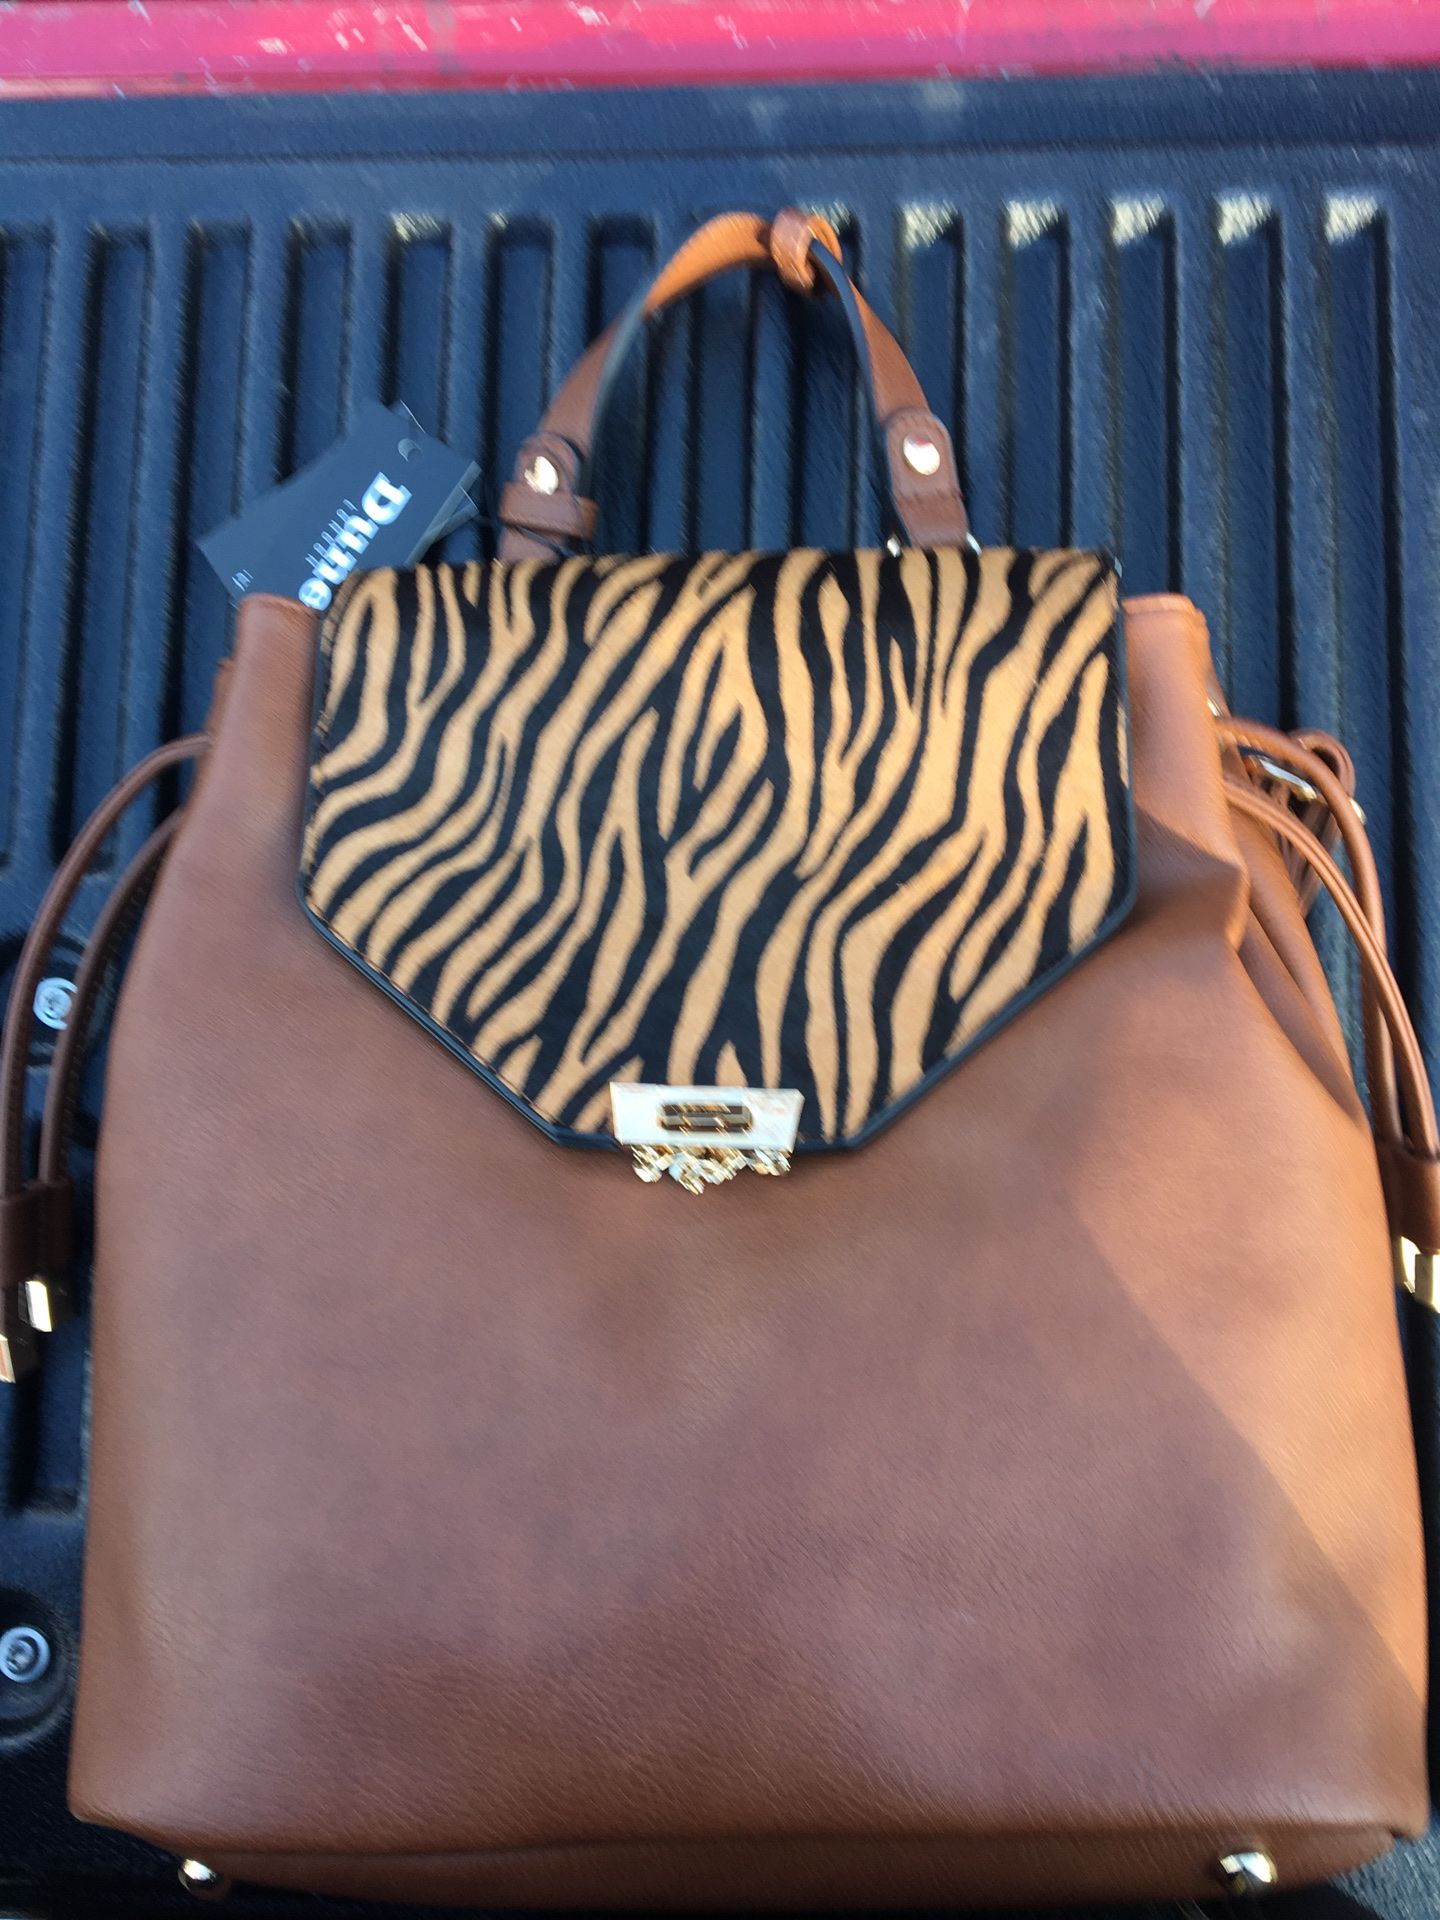 Dune tiger striped backpack/purse (black & tan also)